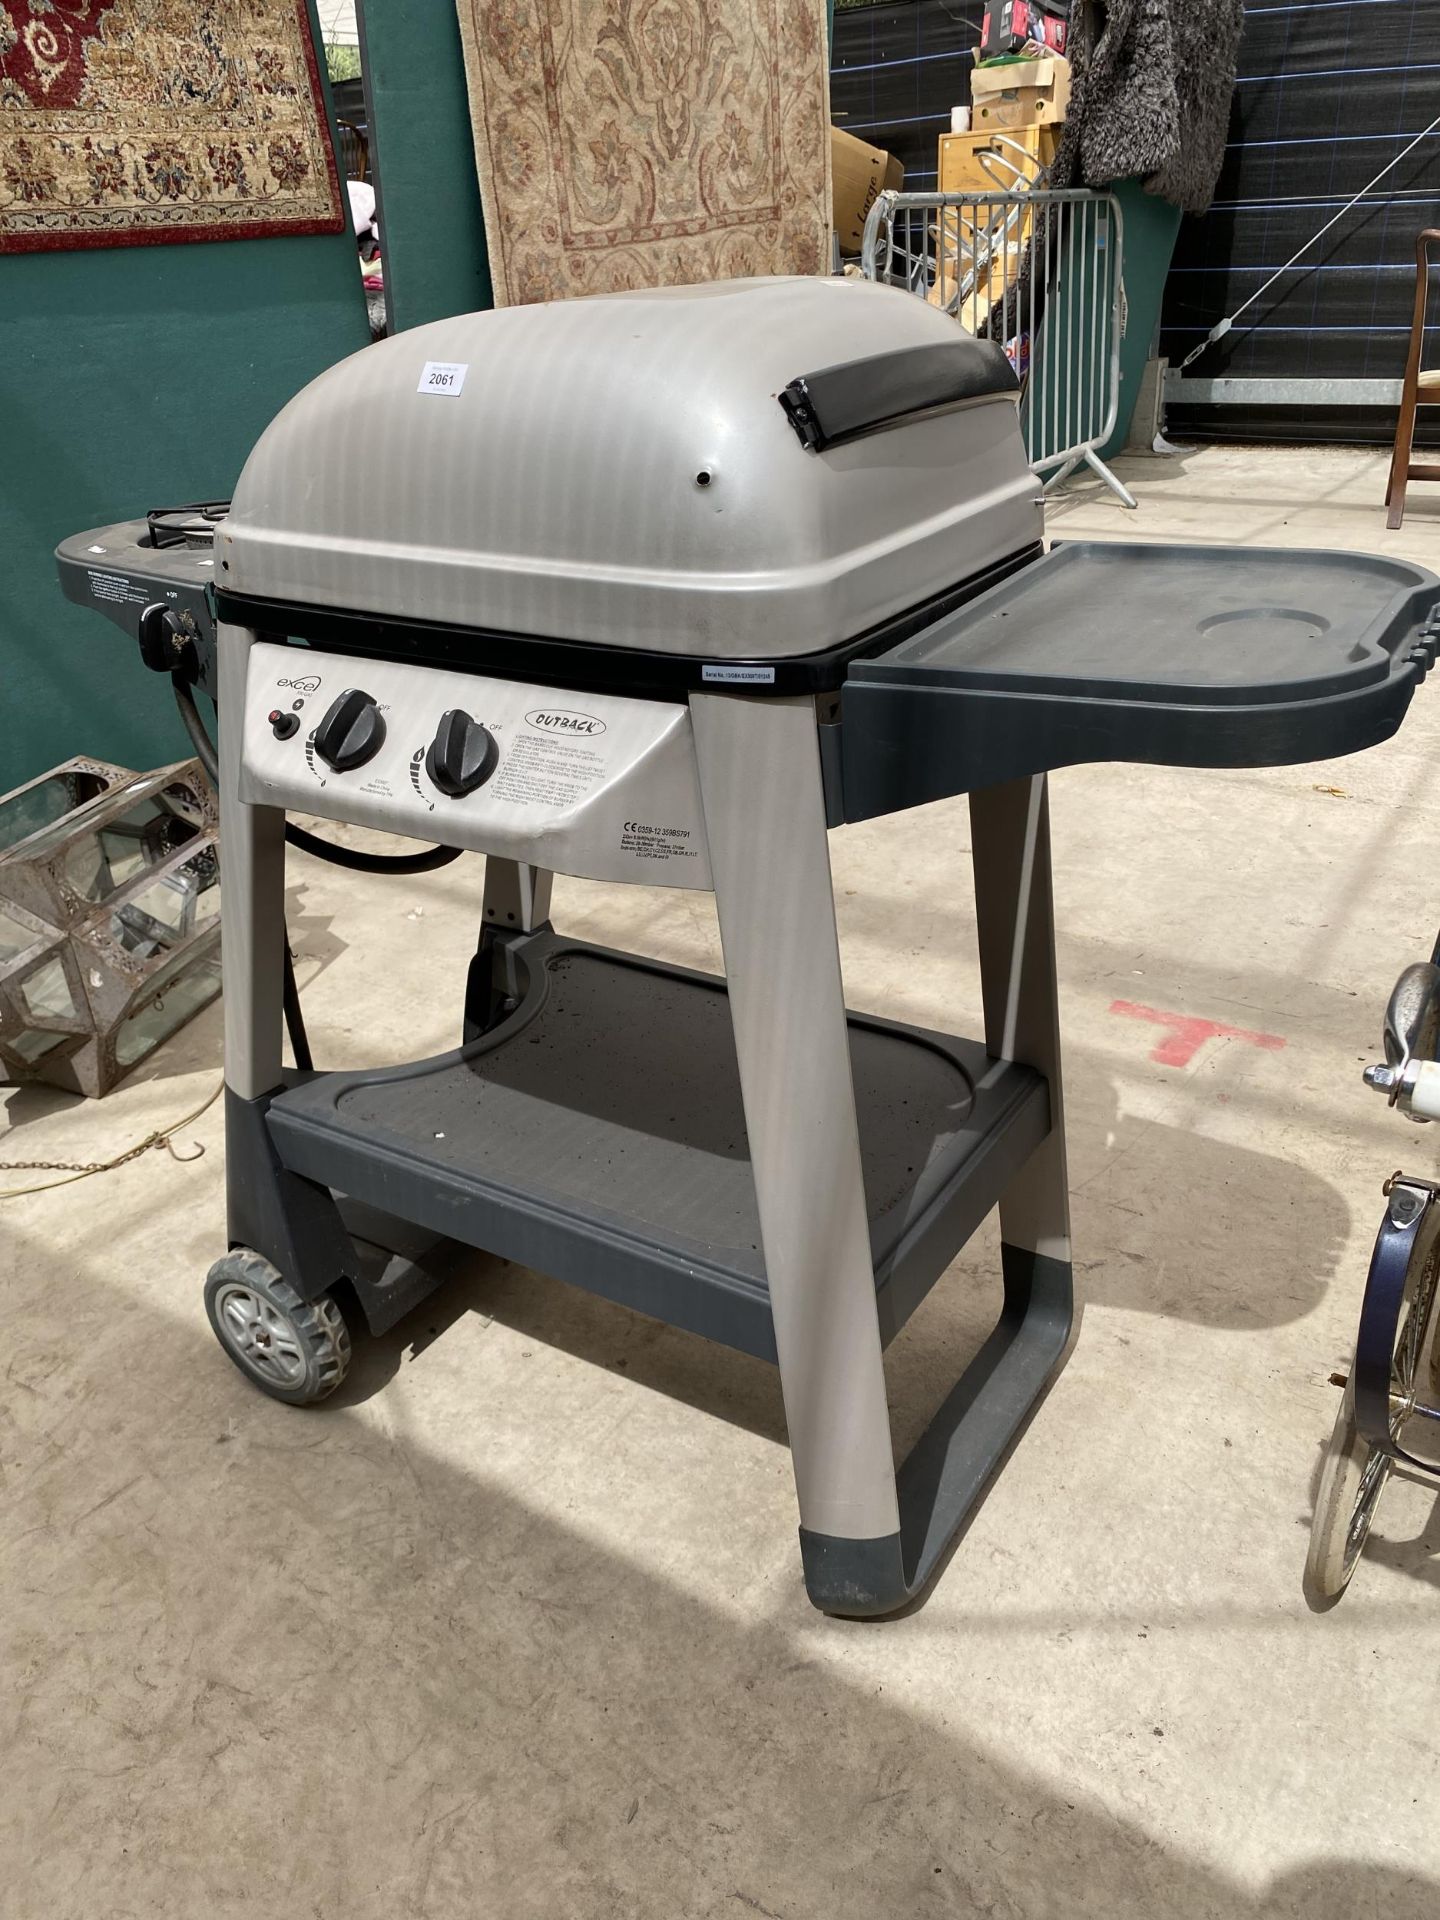 AN OUTBACK GAS BBQ FRAME (NO GRILL) - Image 3 of 6